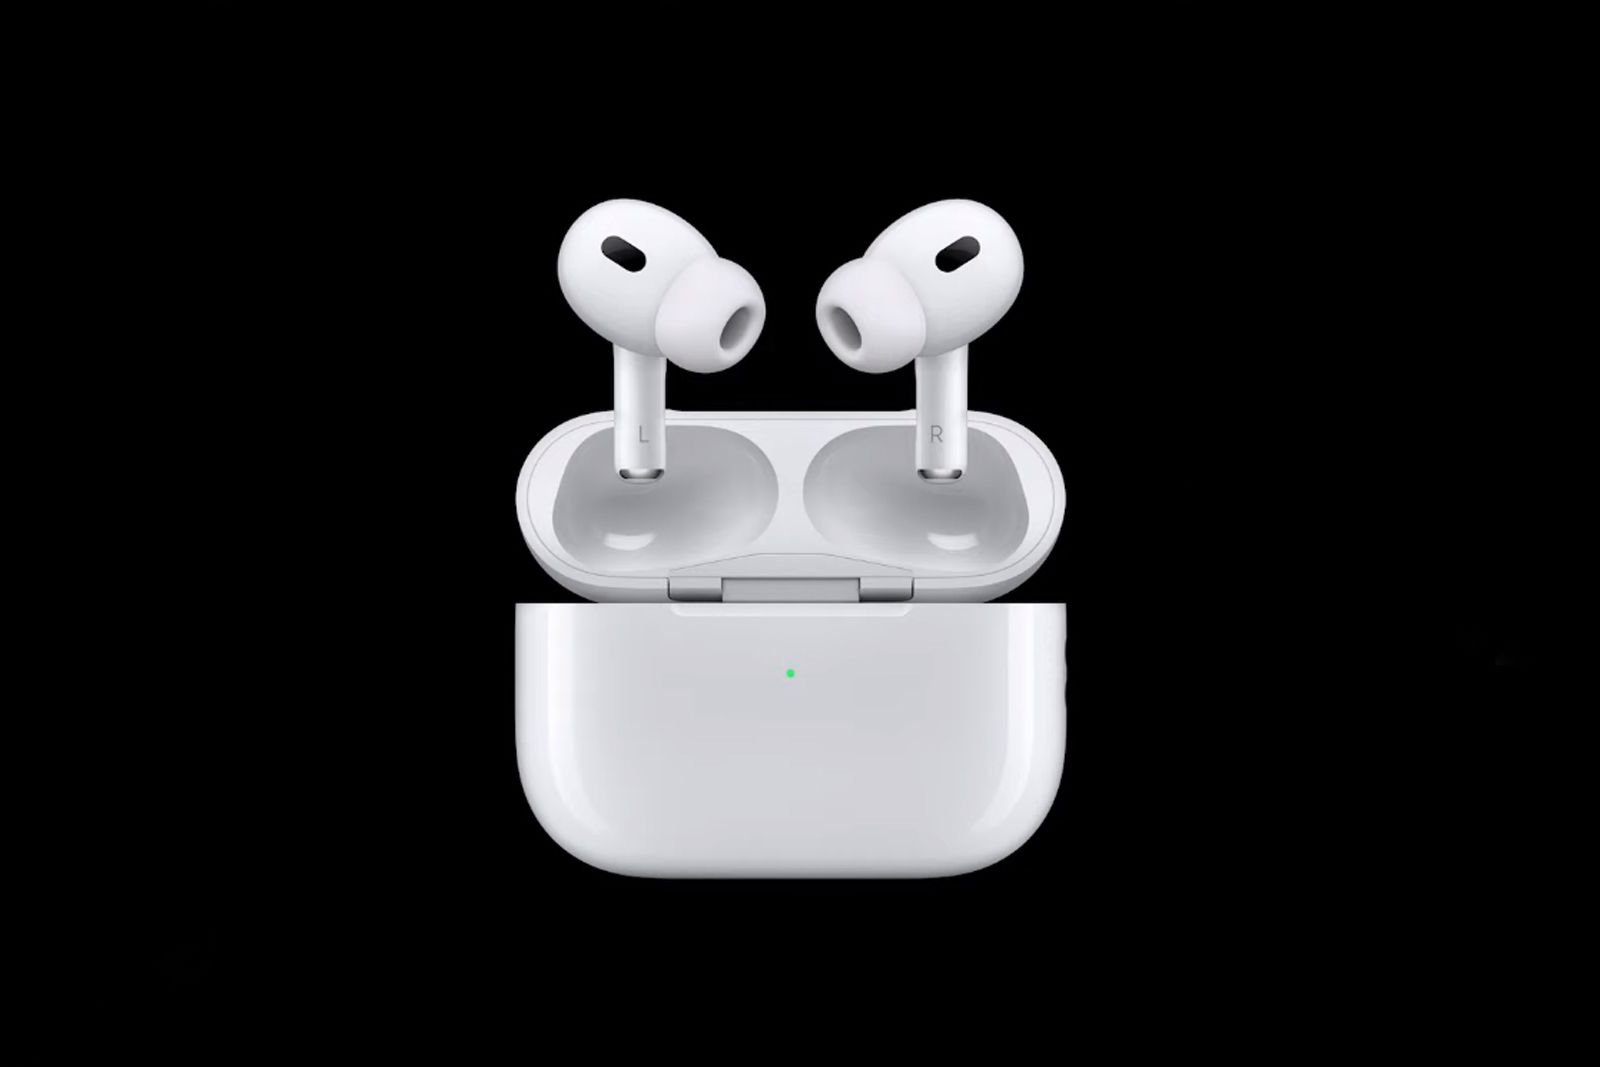 Apple's new AirPods Pro feature H2 chip, personalised Spatial Audio